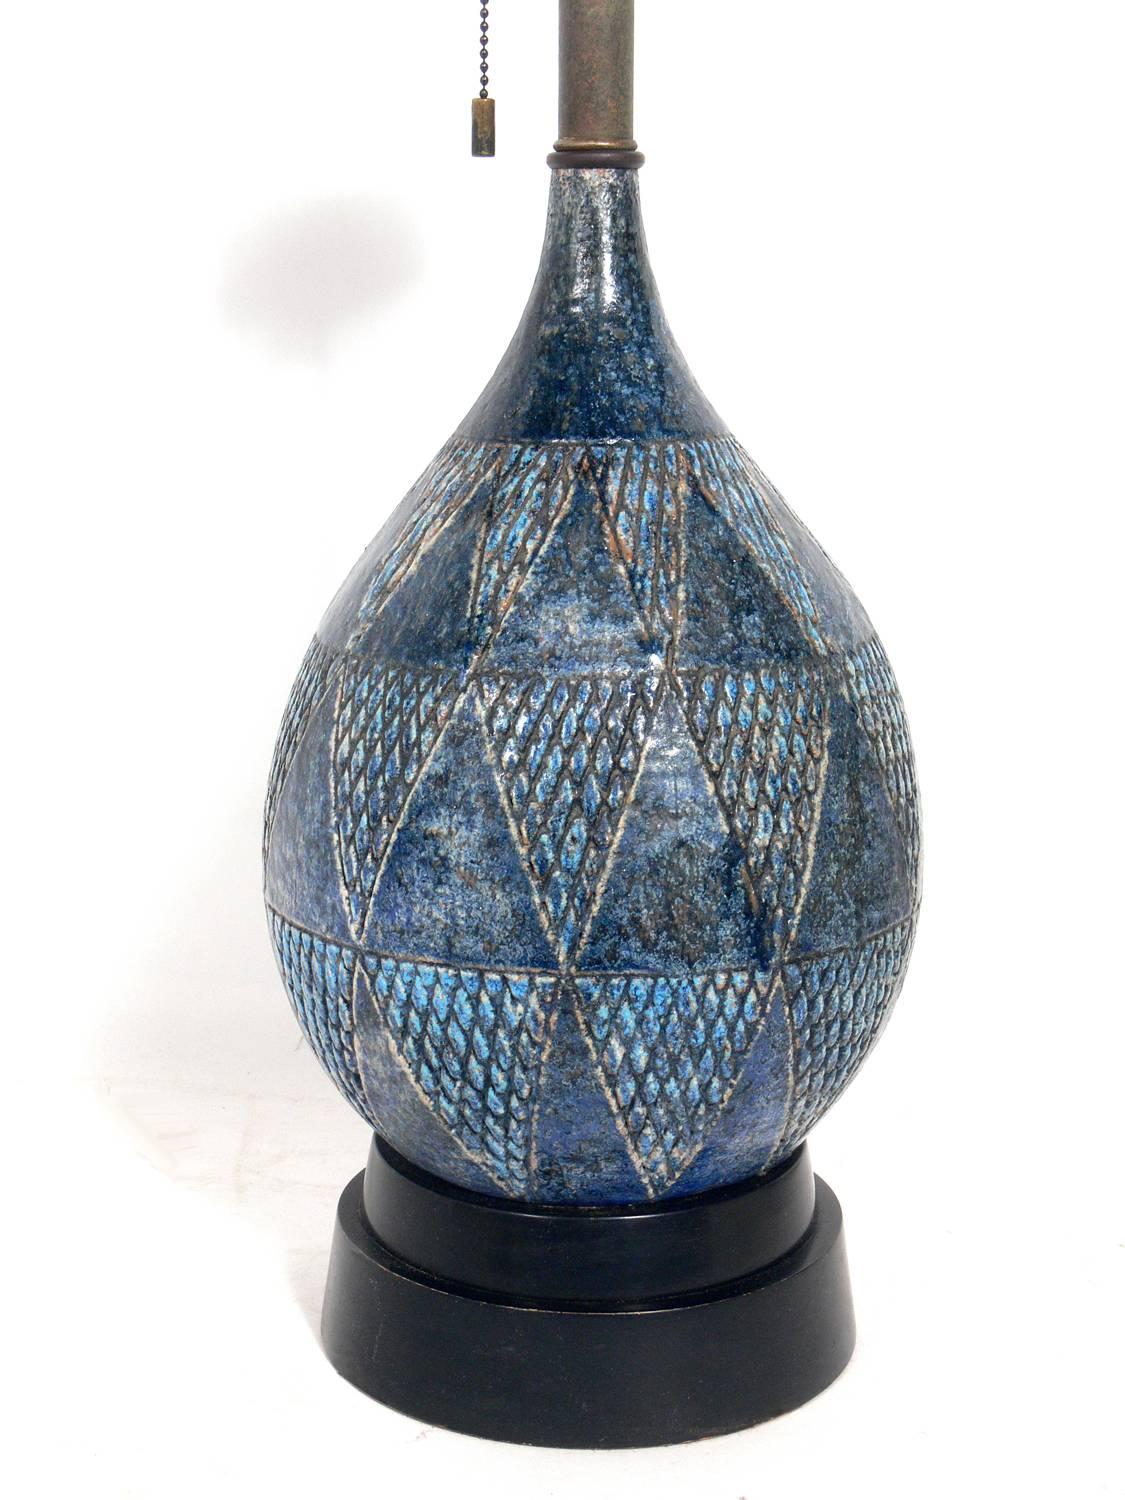 Mid-Century Modern blue ceramic pottery lamp, attributed to Gerald Thurston for Lightolier, American, circa 1950s. It retains it's original Lightolier three bulb socket. The price noted below includes the shade. Rewired and ready to use.